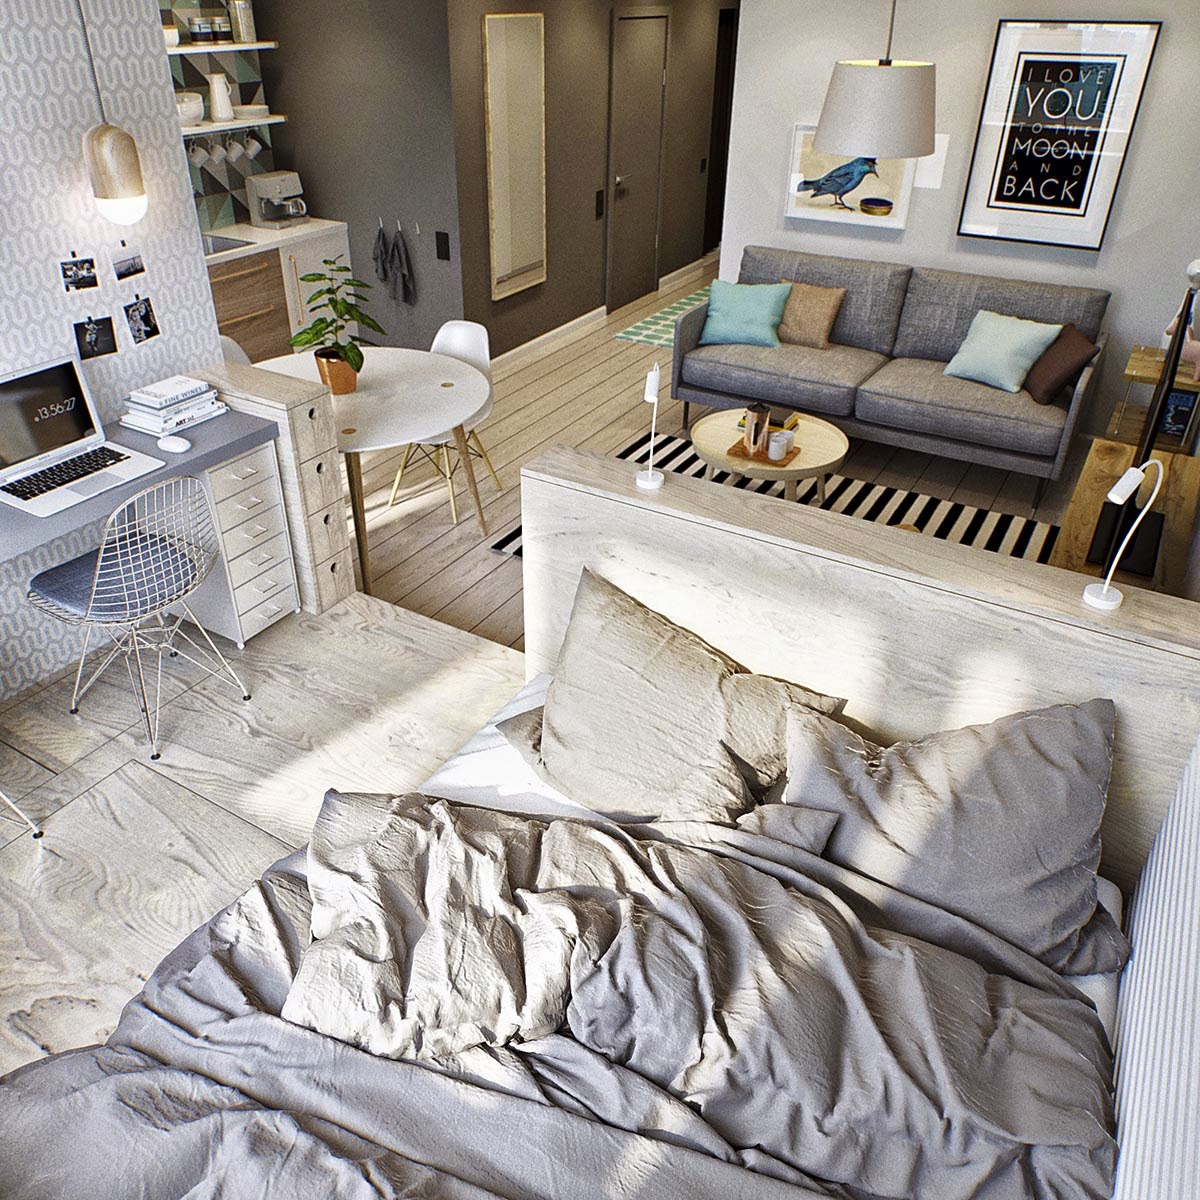 Uil Pardon Slecht Dreamy and functional 40 square meters apartment - Daily Dream Decor